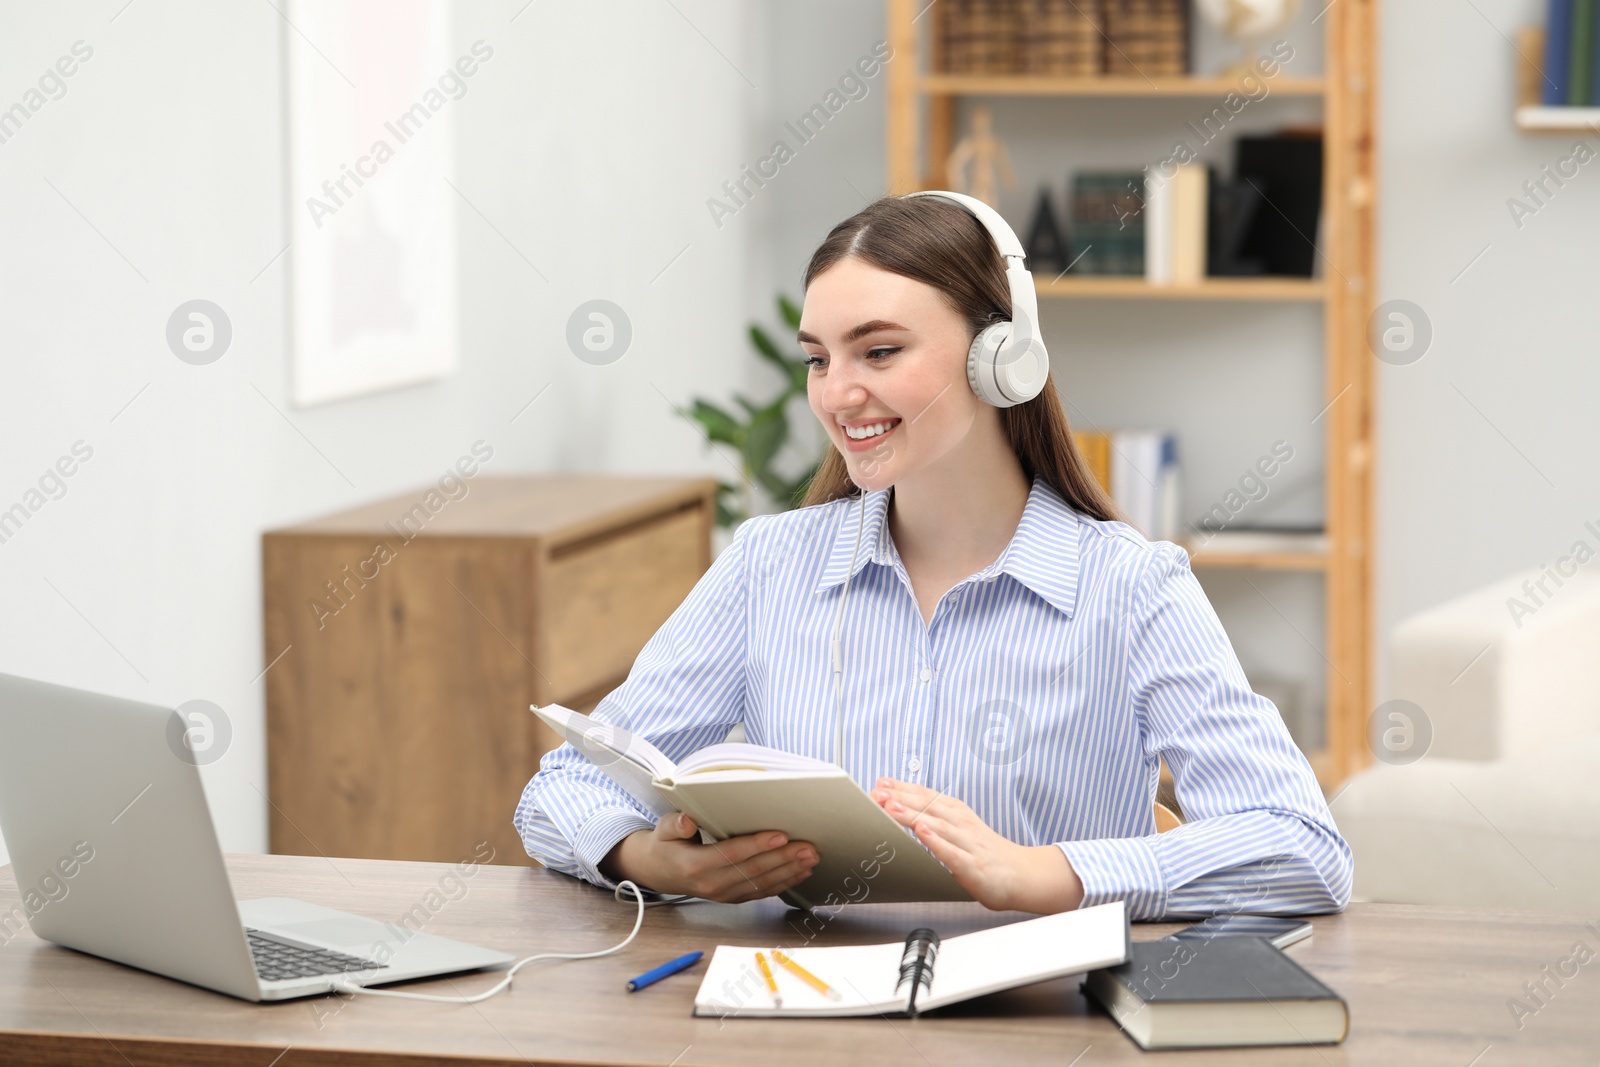 Photo of E-learning. Young woman with book during online lesson at table indoors